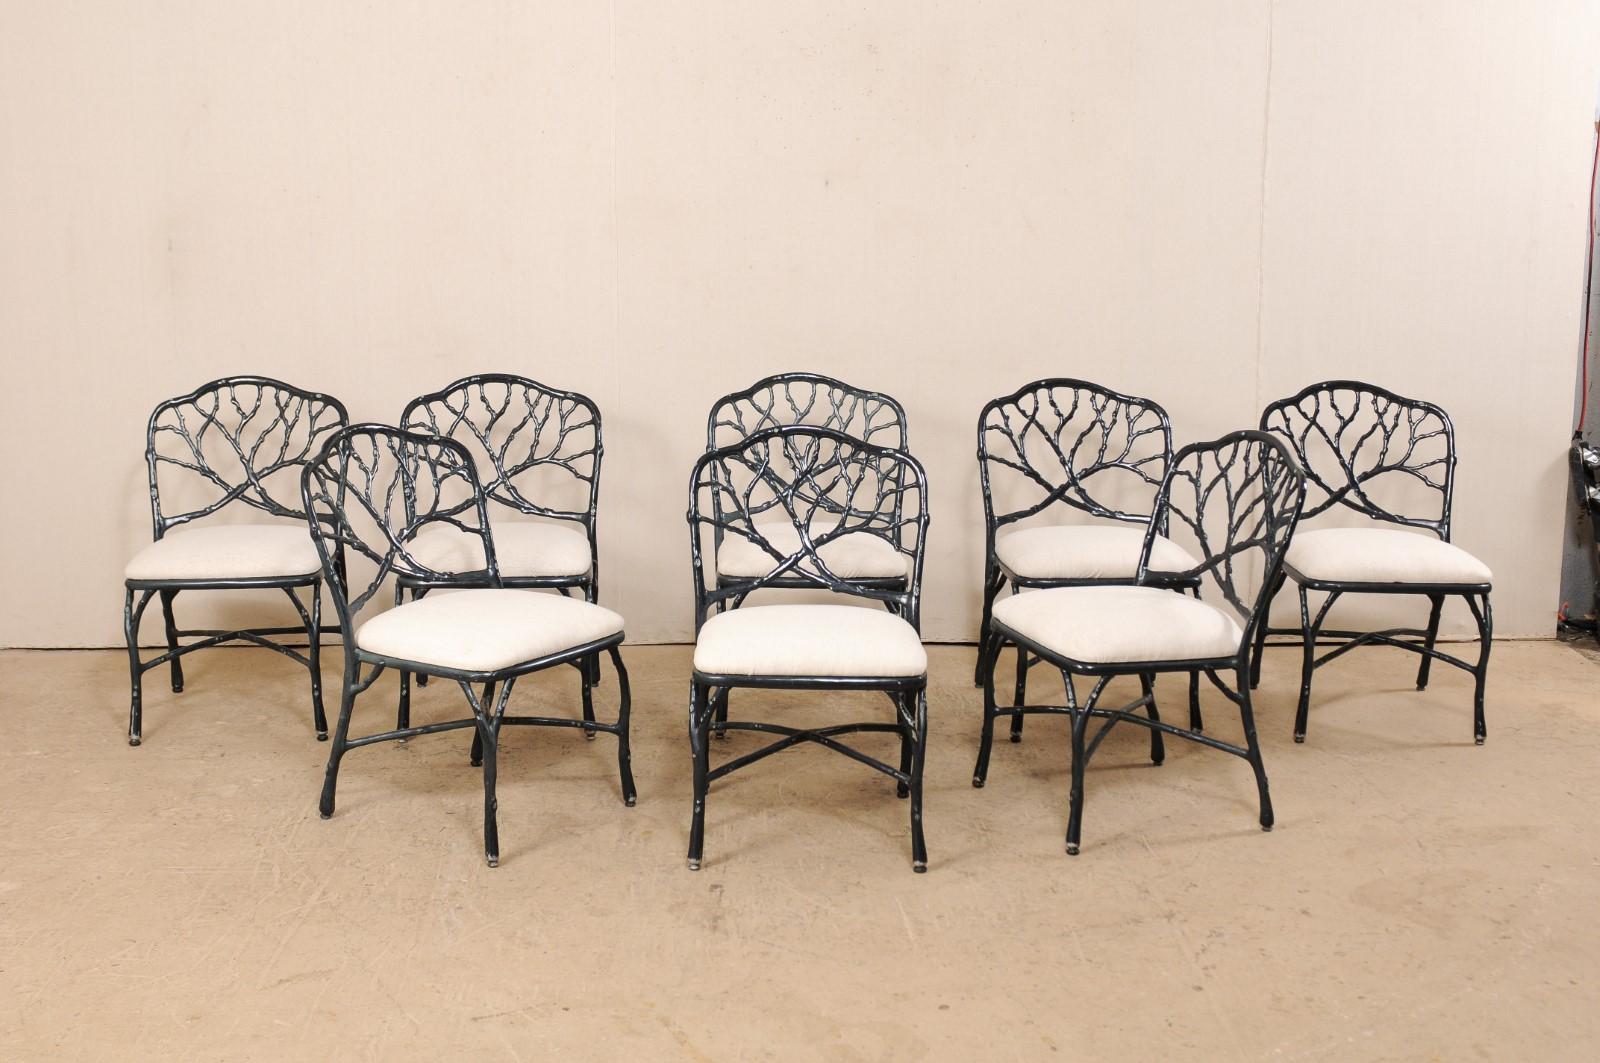 A set of eight vintage American indoor / outdoor dining chairs with branching tree limb motif. These side chairs have been masterfully created from cast aluminum, with a powder coated finish. The chair backs have a playful crossing branch and twig